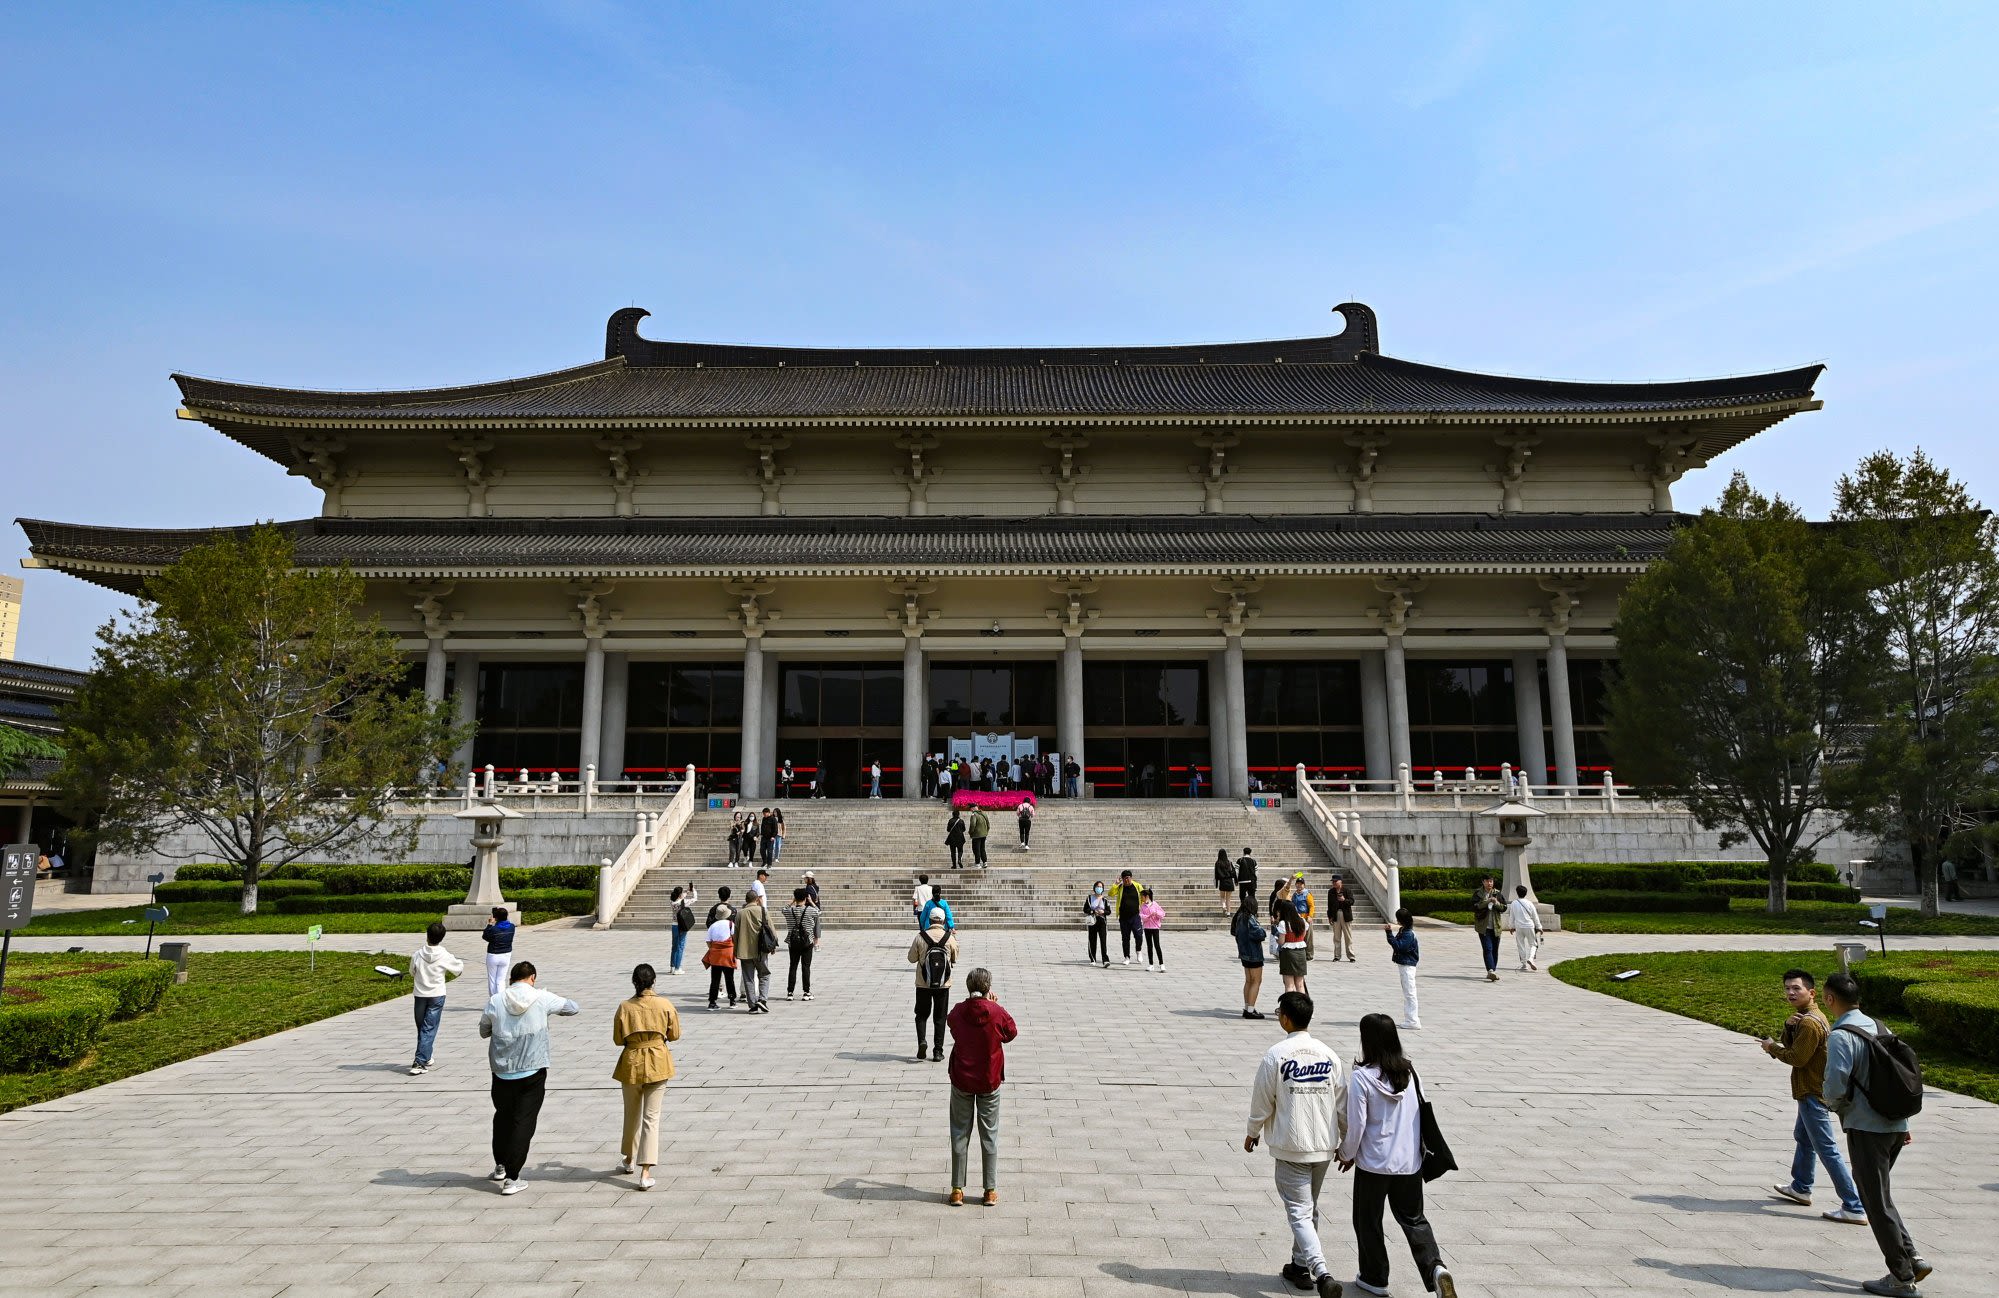 Foreign visitors find barrier to entry at China's museums, which may translate to losses for tourism industry